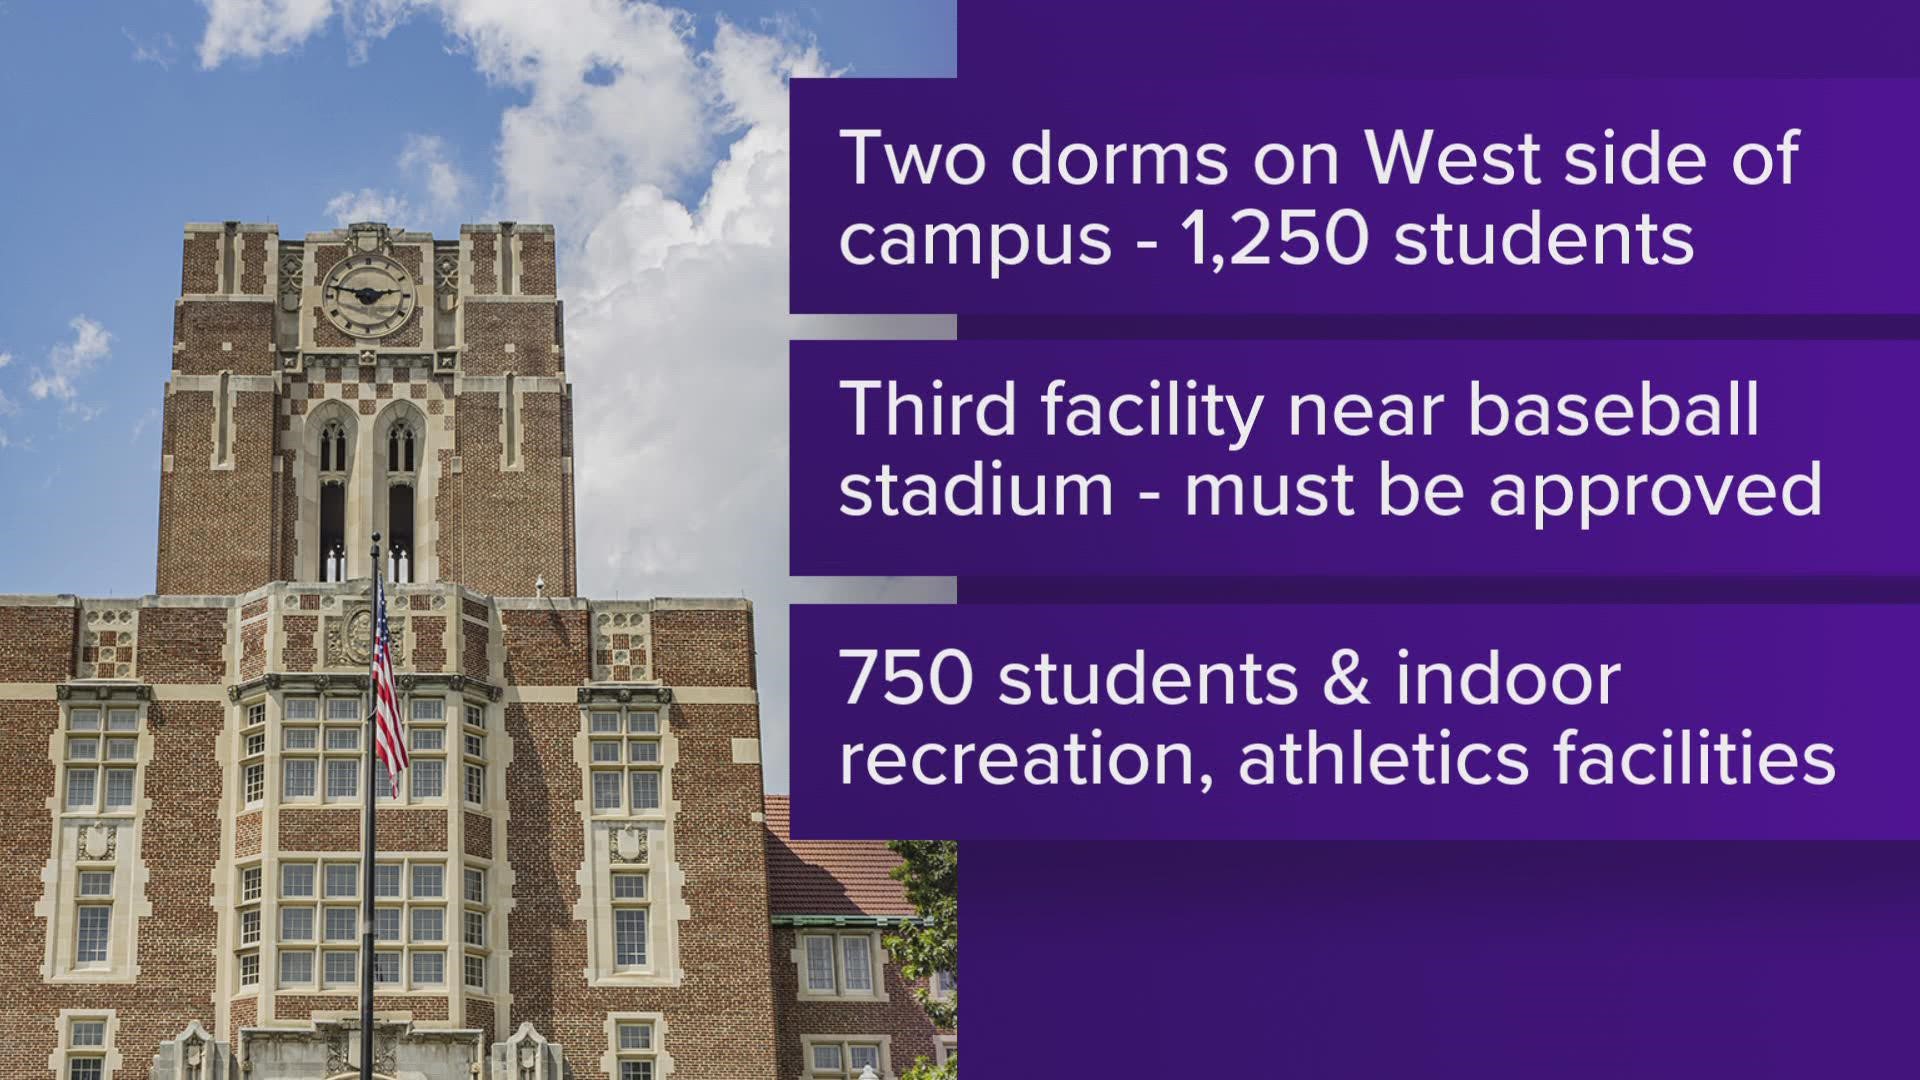 The board of trustees approved adding the buildings to the university's master plan with three new dorms, two of which will be on the west side of campus.